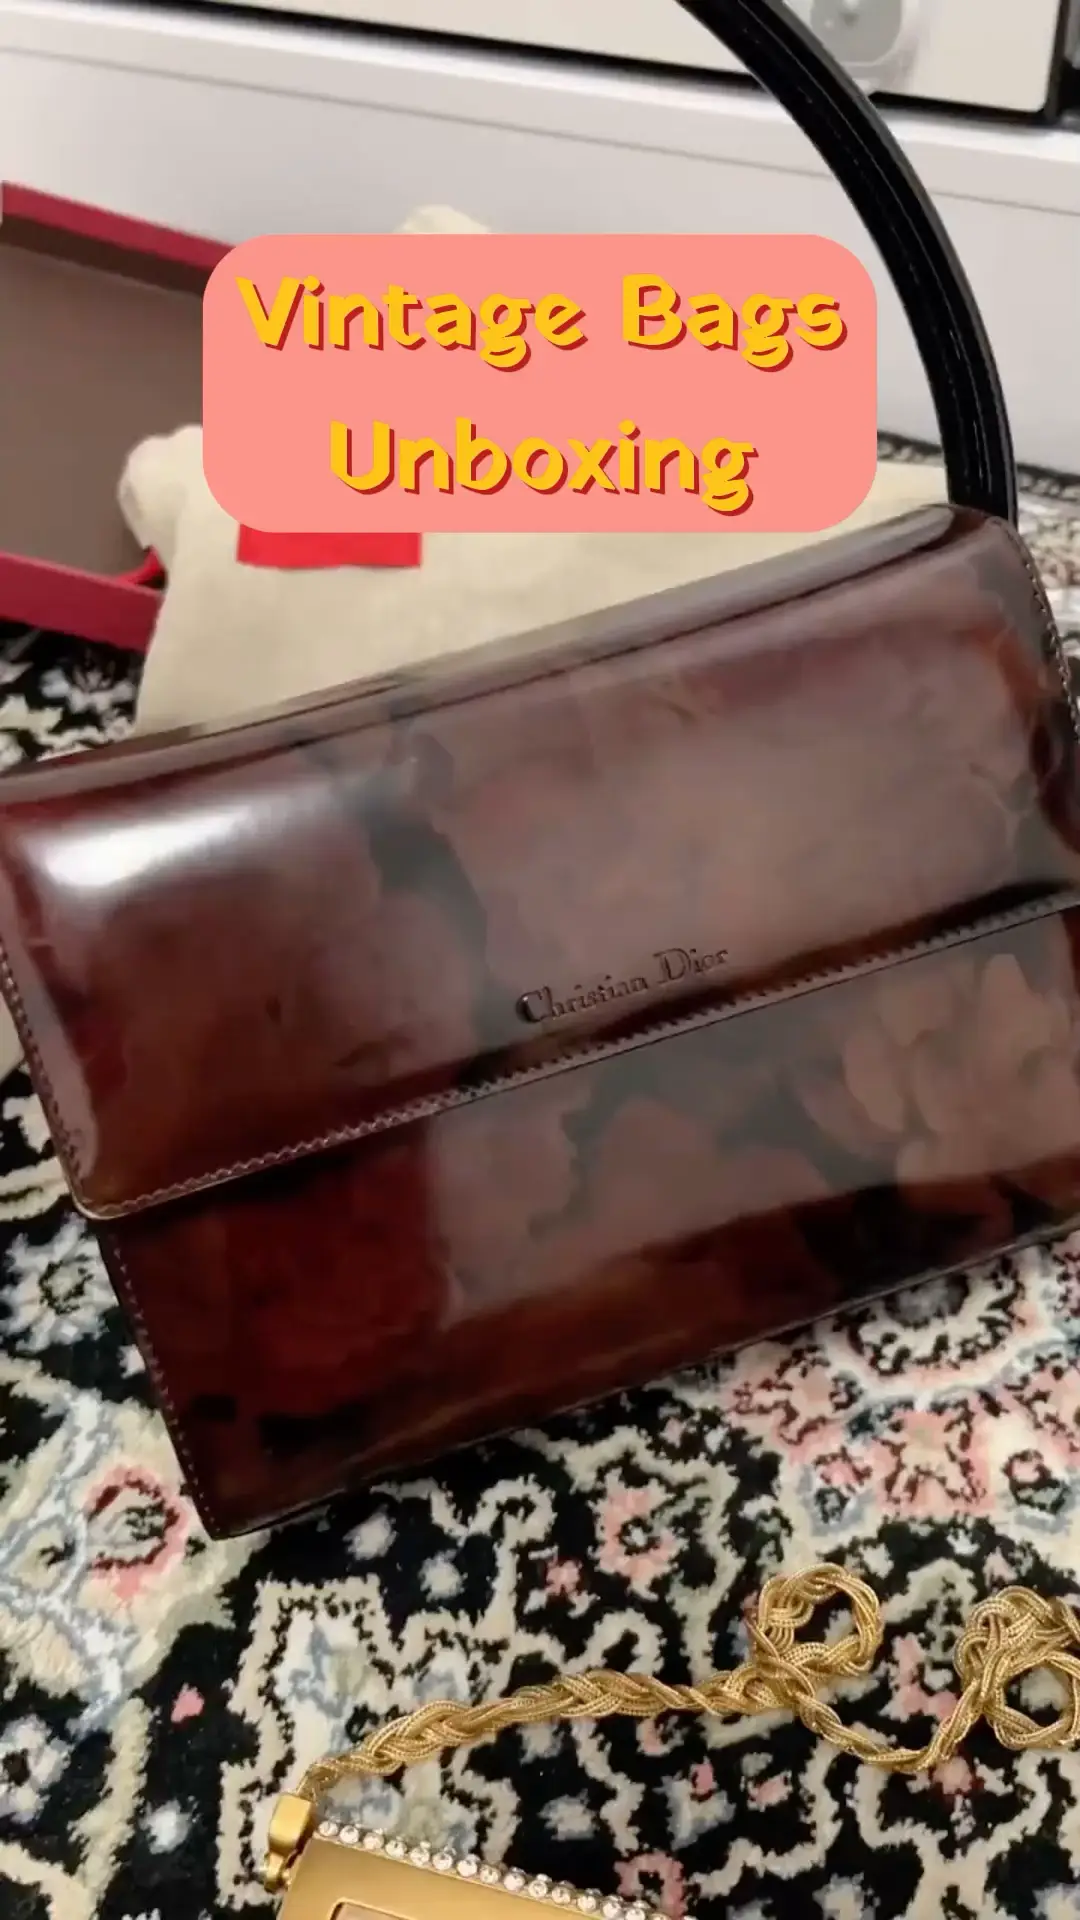 Vintage bags unboxing 🎁, Video published by Vintage·Luxury